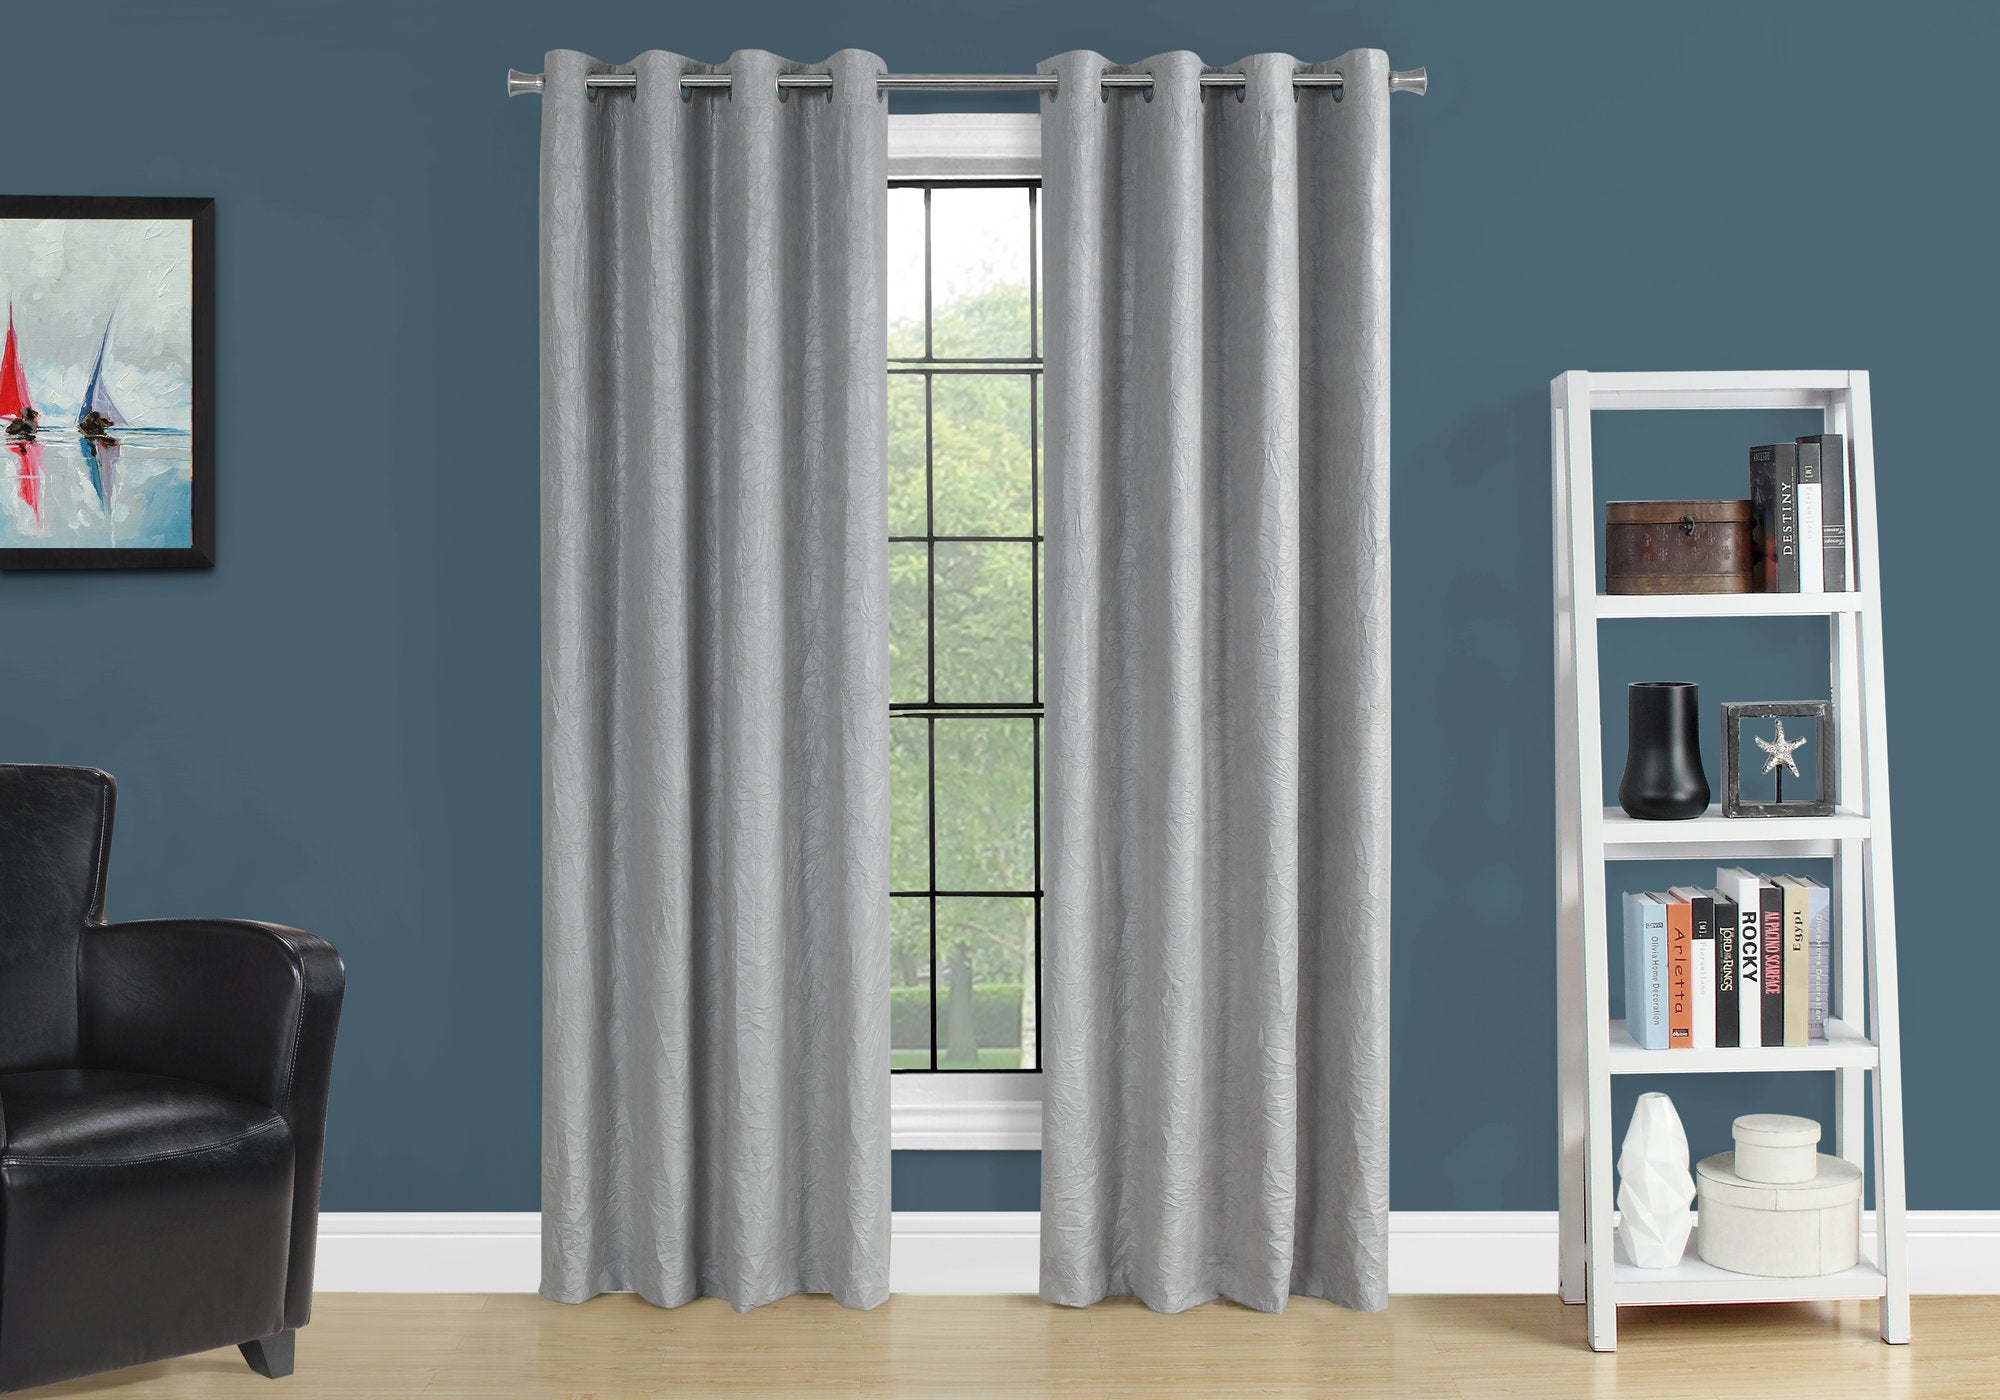 MN-879845    Curtain Panel, 2Pcs Set, 54"W X 95"L, Room Darkening, Grommet, Living Room, Bedroom, Kitchen, Micro Suede, Wrinkled  Finish, Polyester Room Darkening Fabric, Silver, Contemporary, Modern